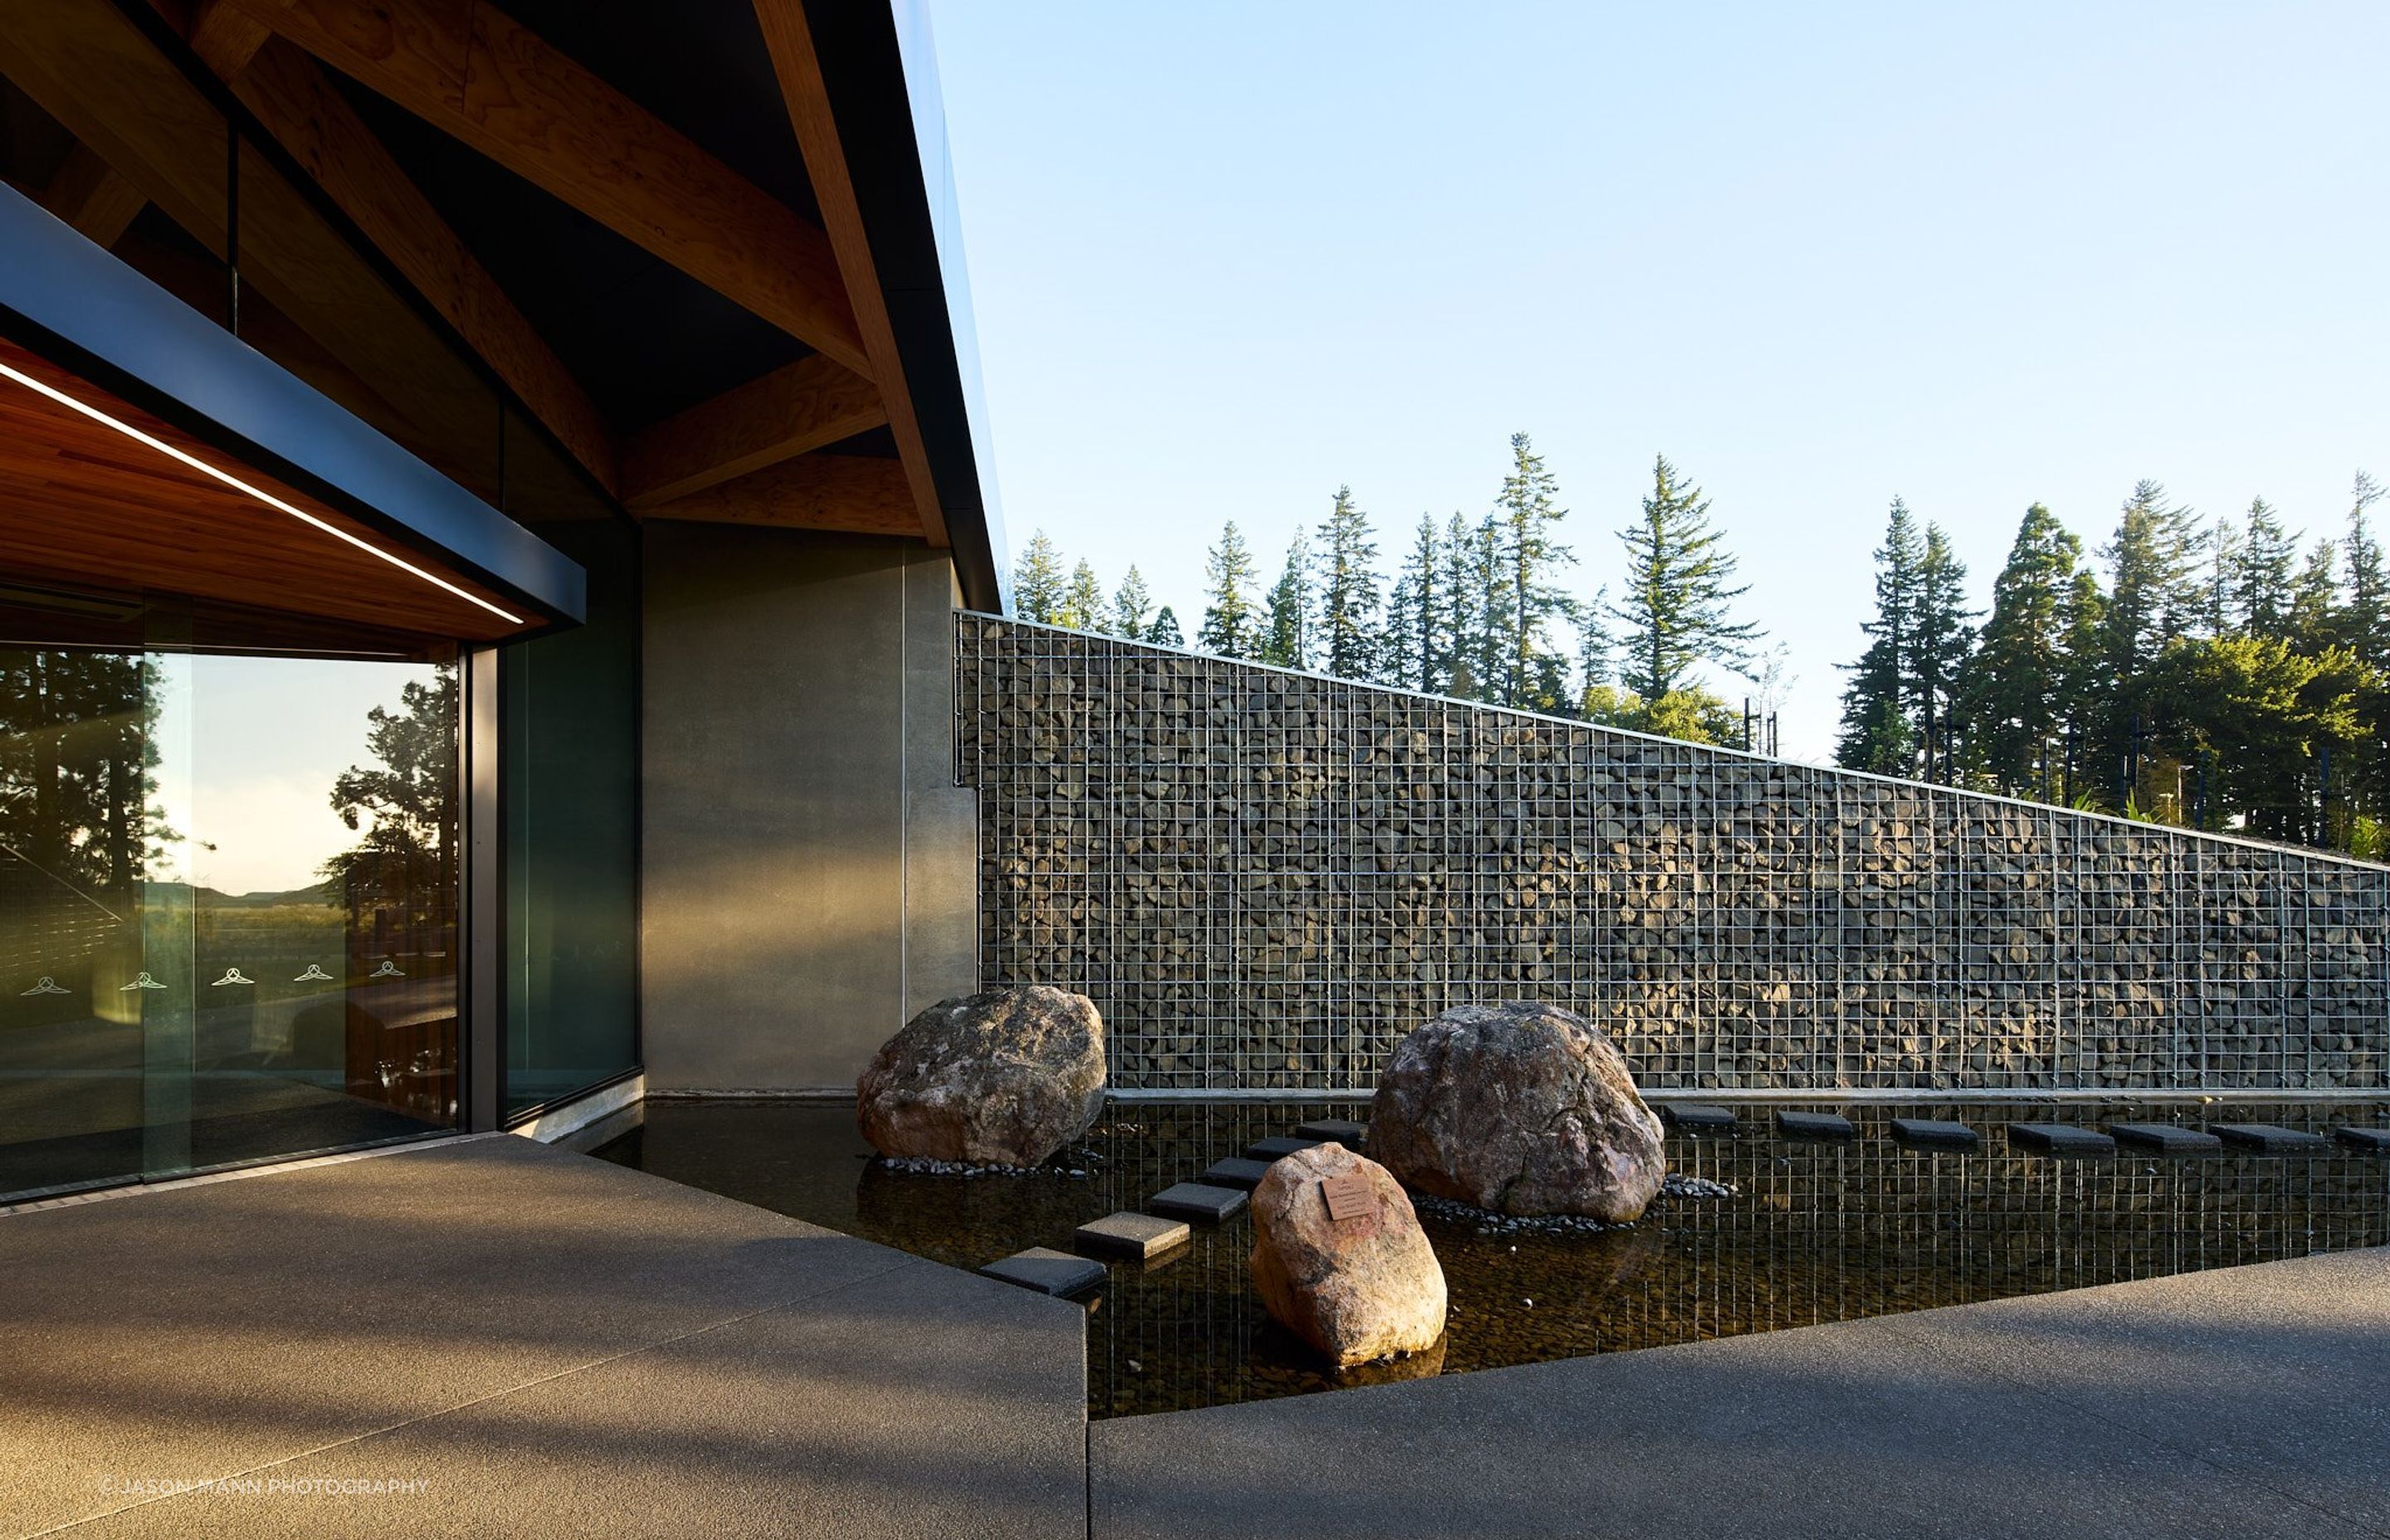 The entry to the complex features gabion walls and a water feature, narrowing into the entranceway.